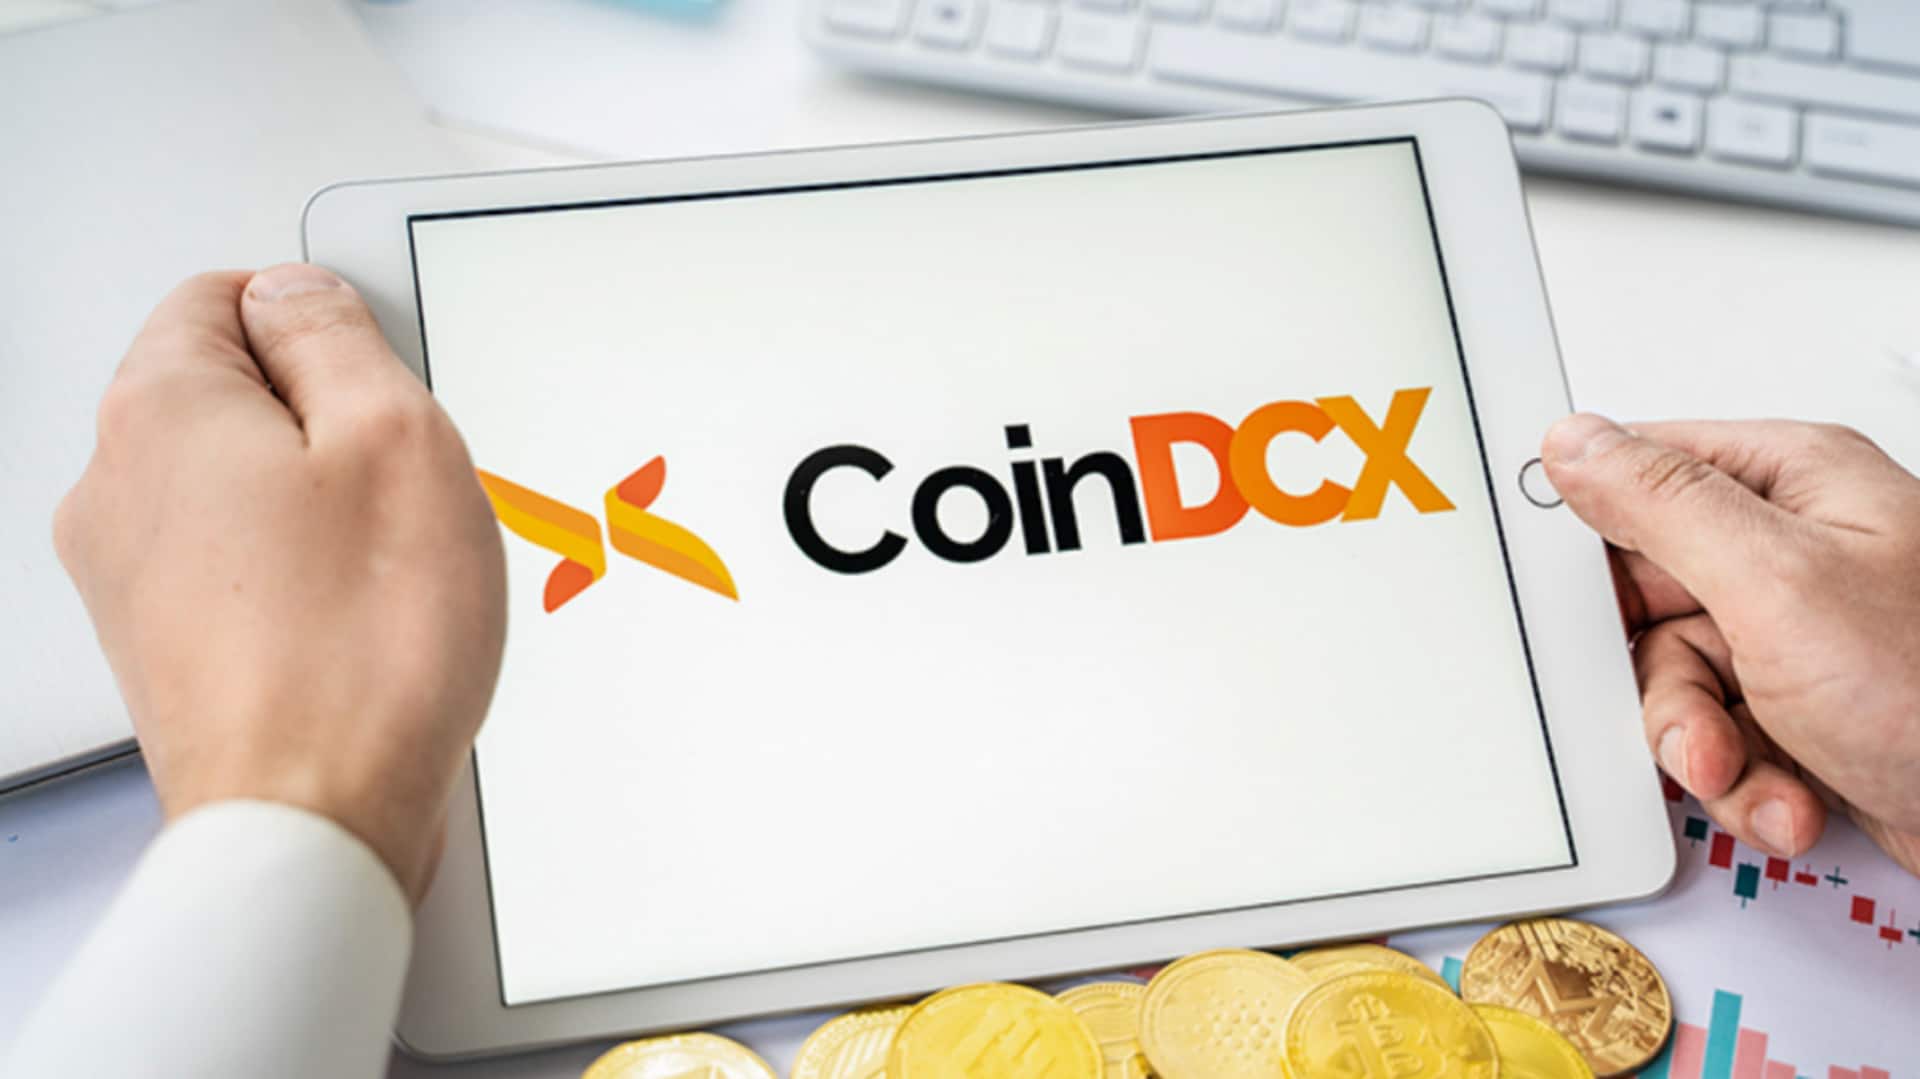 CoinDCX cuts workforce by 12% amid market struggles